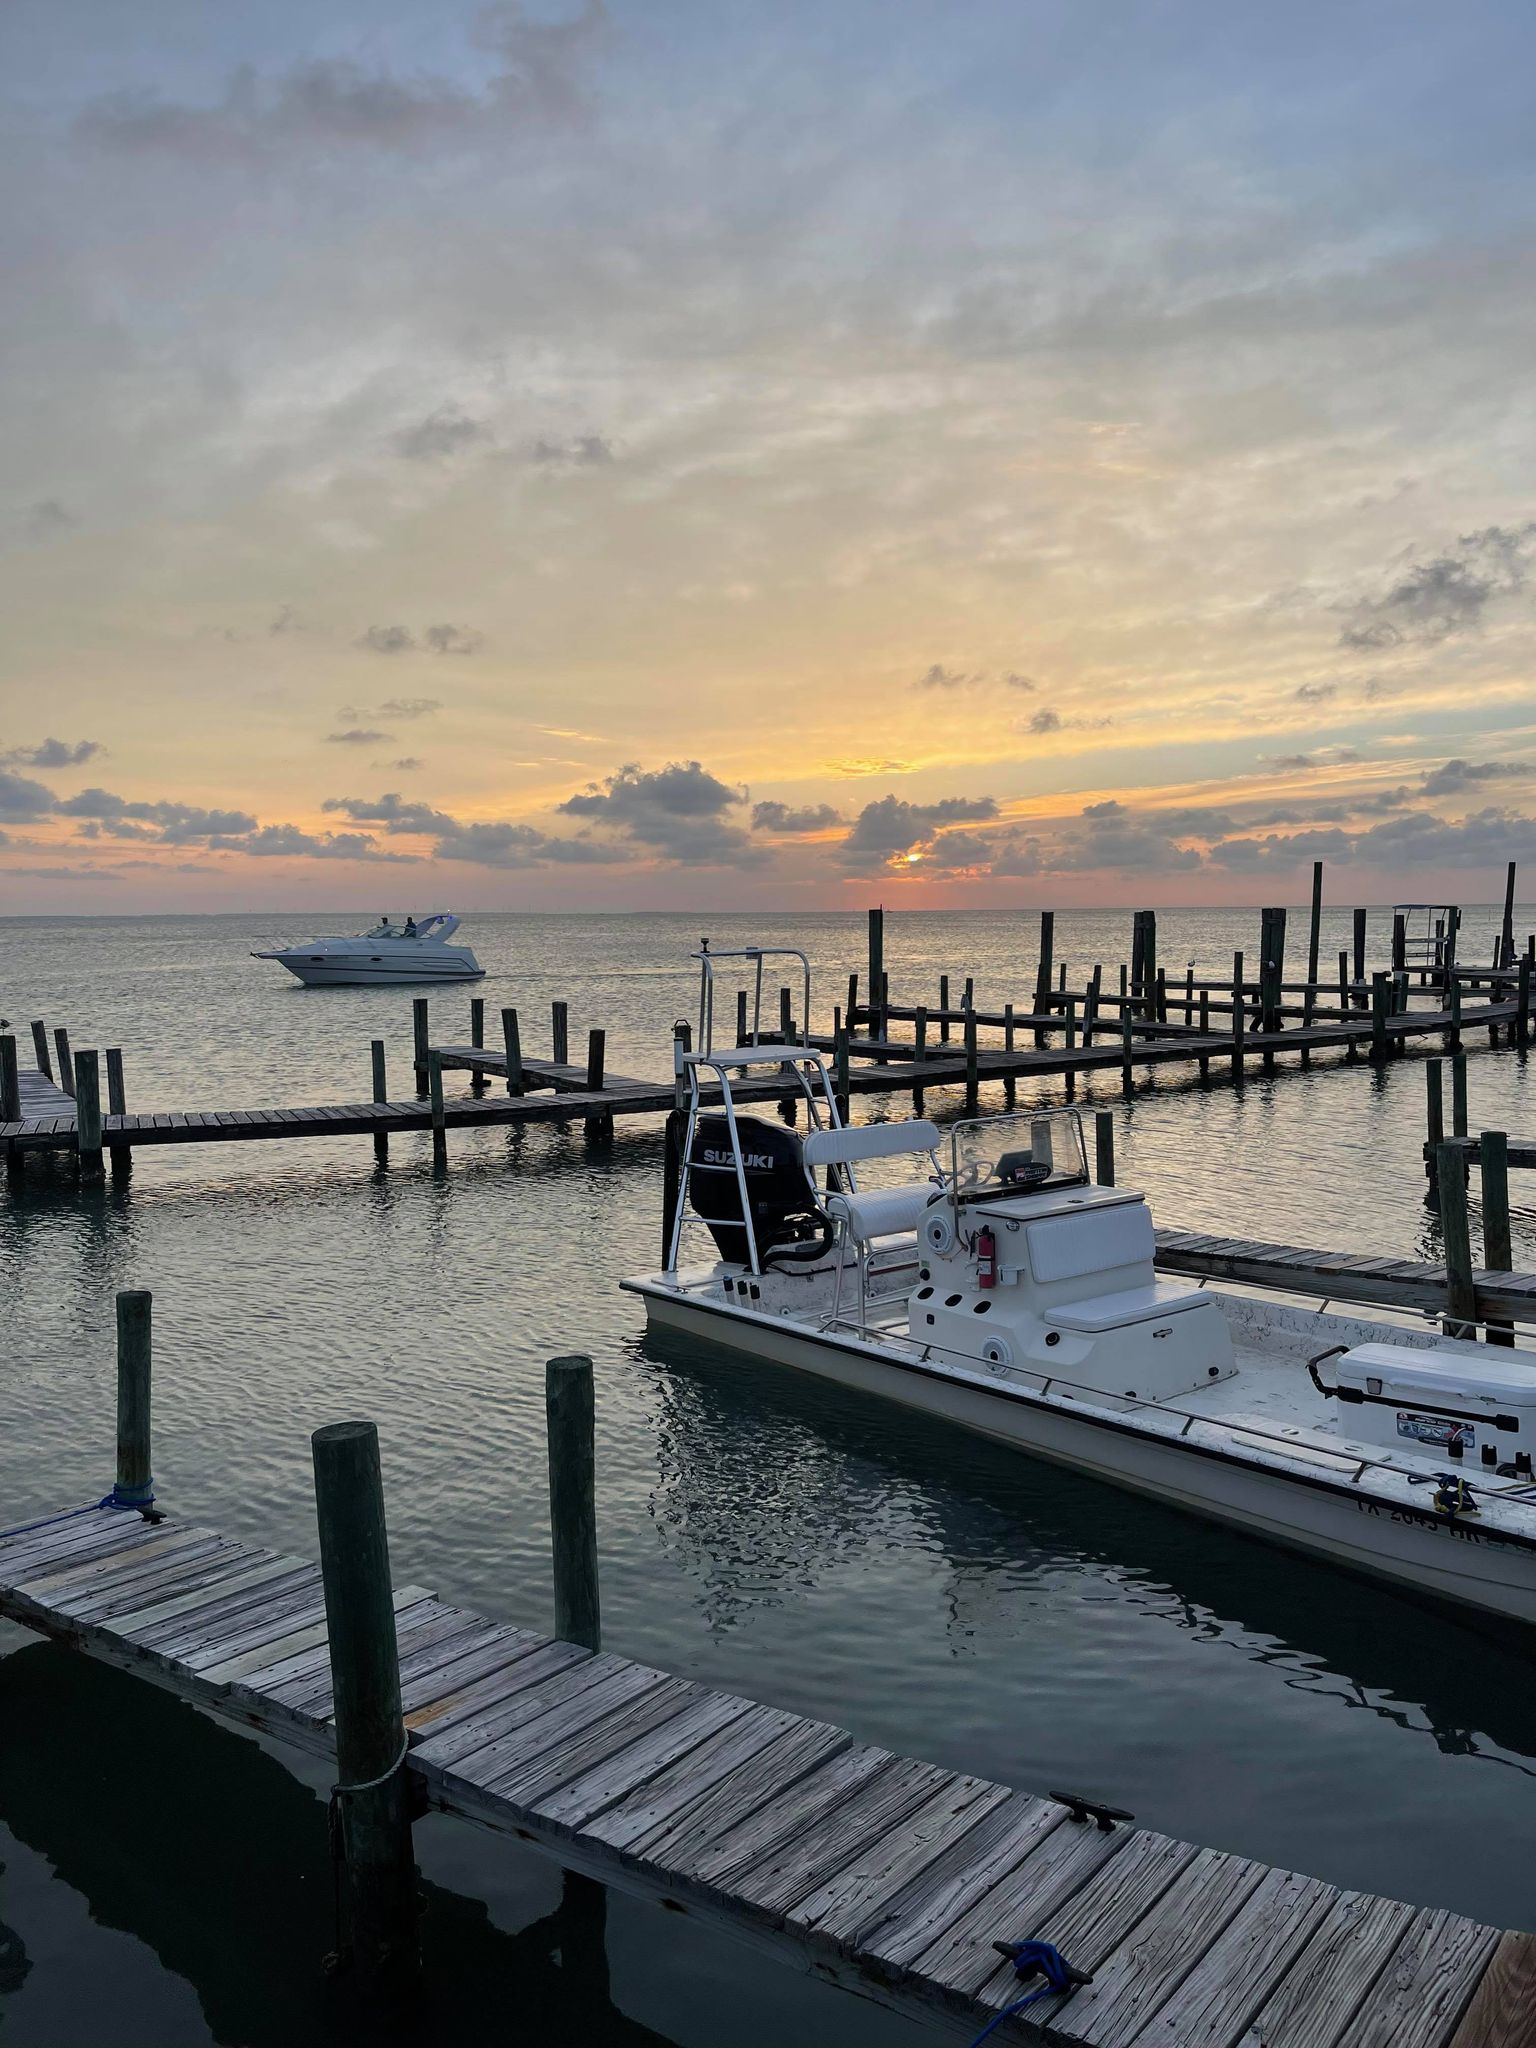 Pictured are boats docked in the Laguna Madre Bay near the Painted Marlin Grille and Jim’s Pier on South Padre Island. (Alana Hernandez/Valley Morning Star)